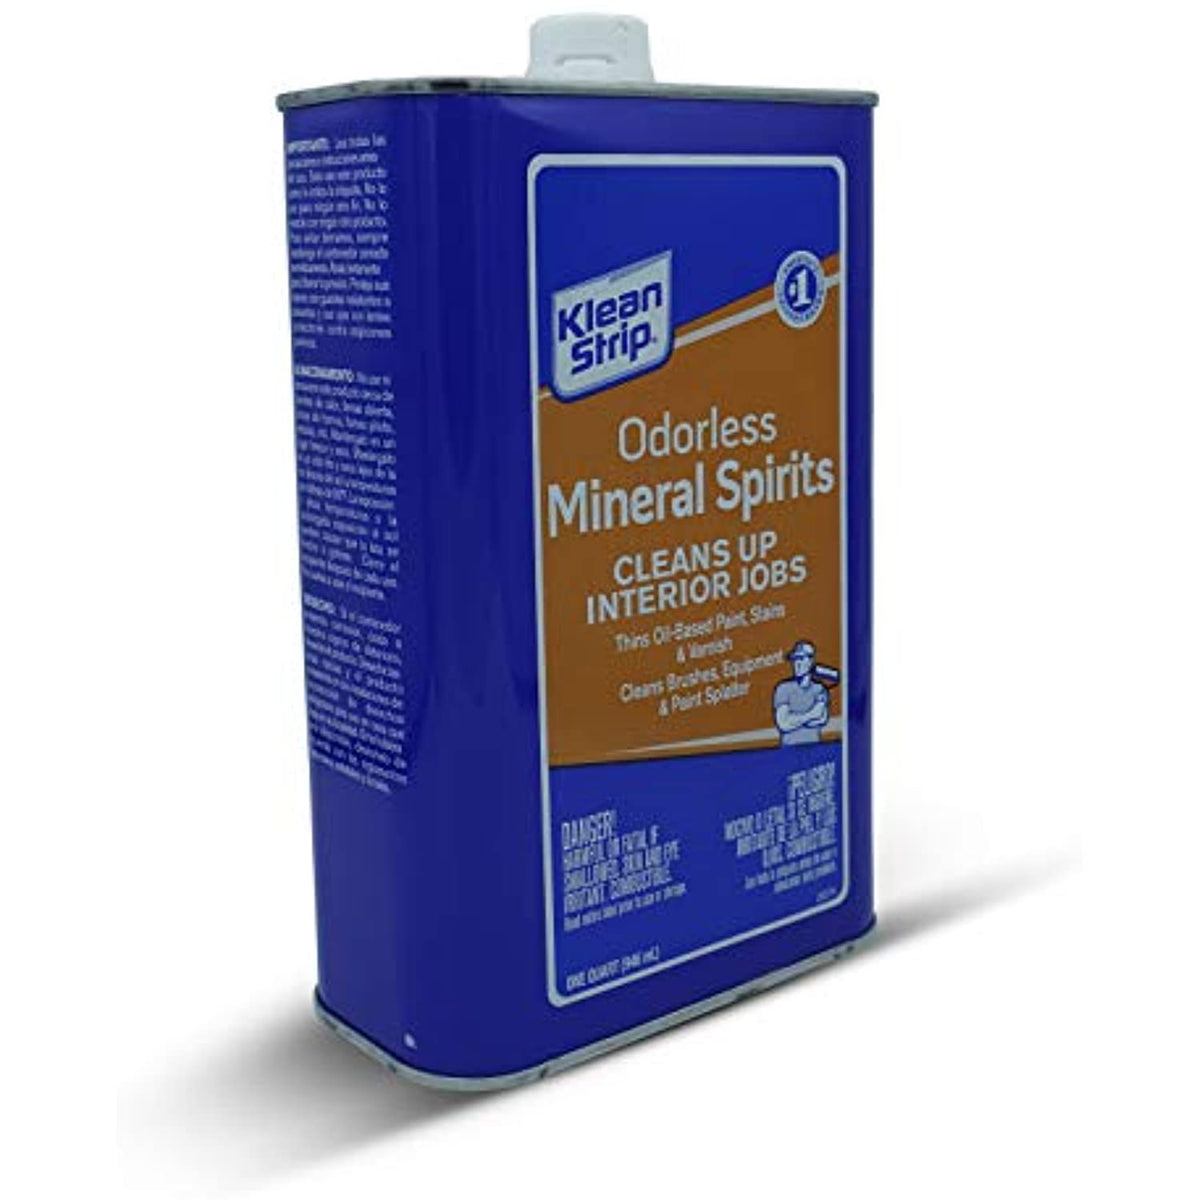 Klean Strip Lacquer Thinner 1 Gallon - Household Paint Solvents 